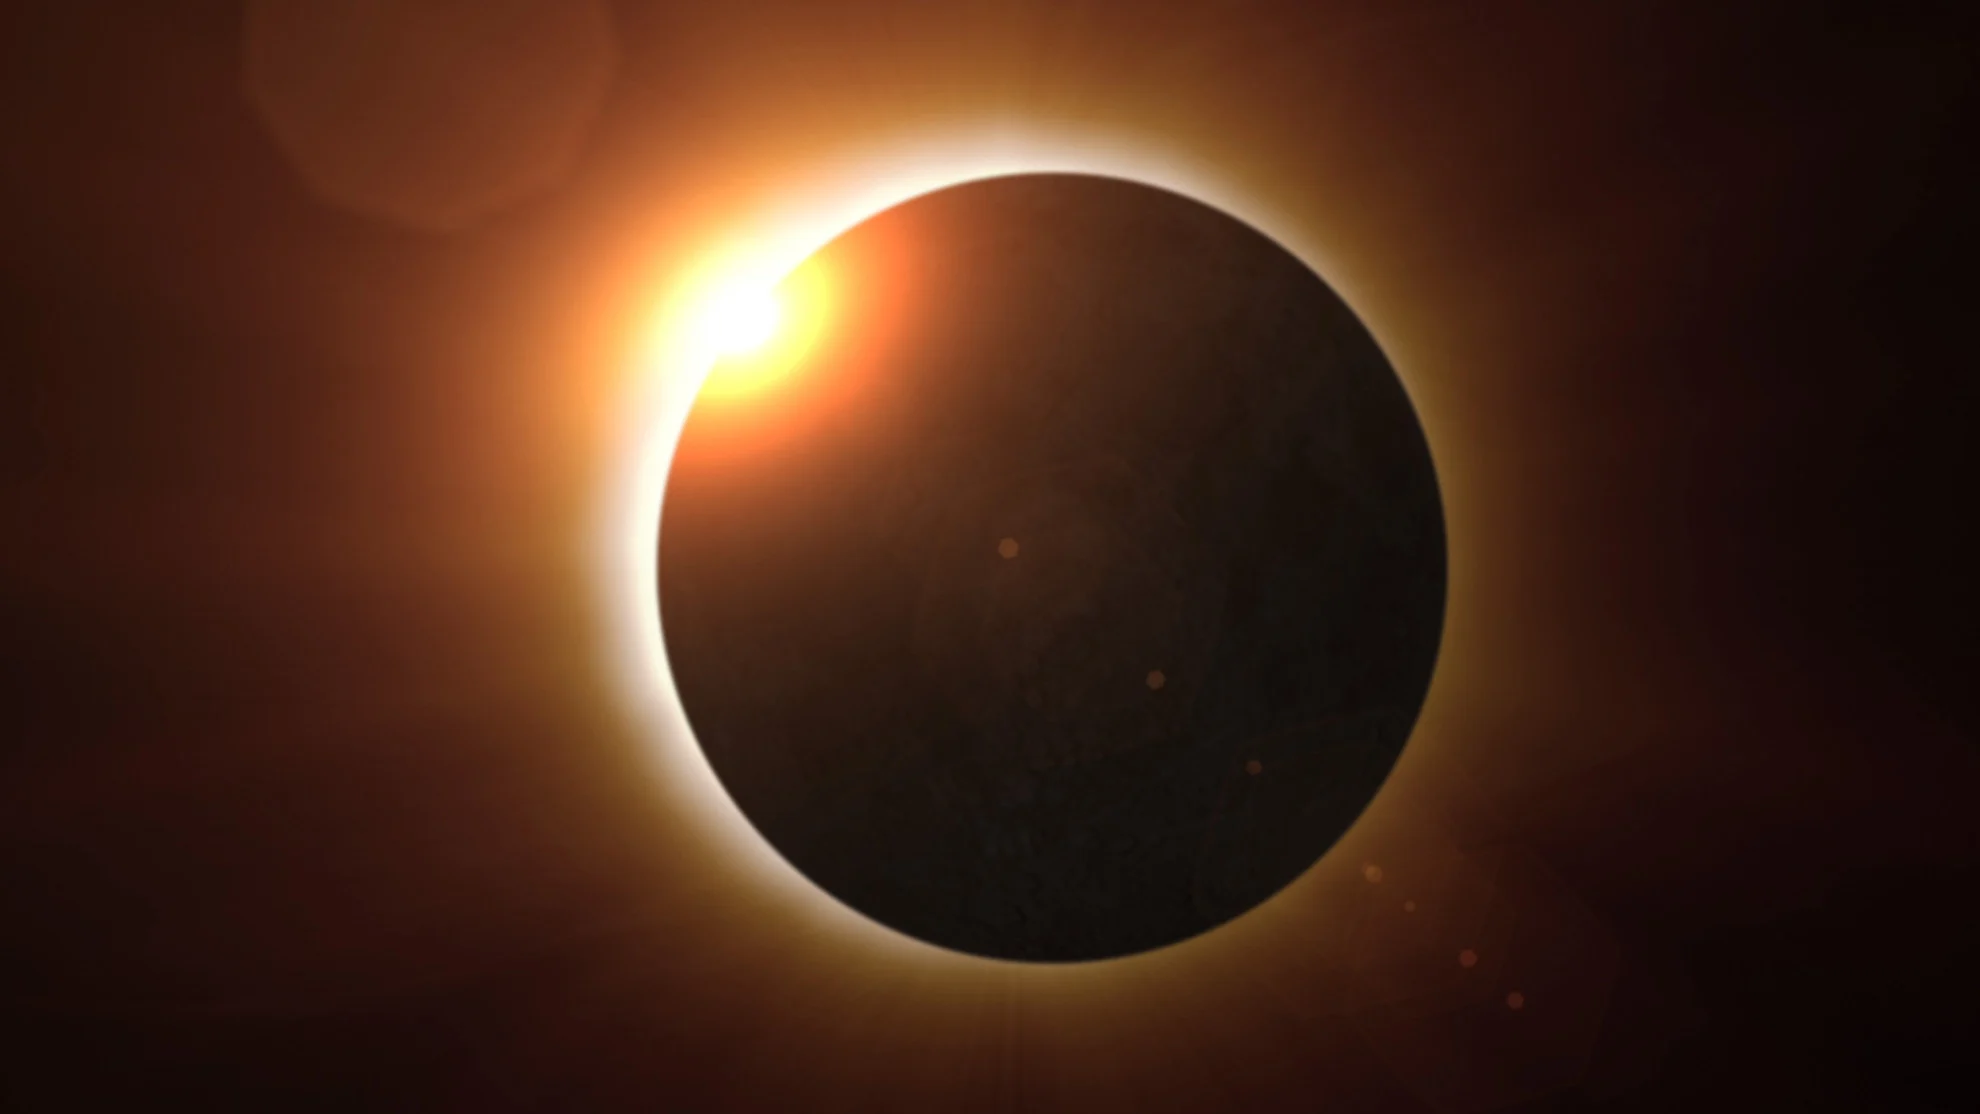 A rare 'hybrid' solar eclipse occurs tonight. Here's how to see it